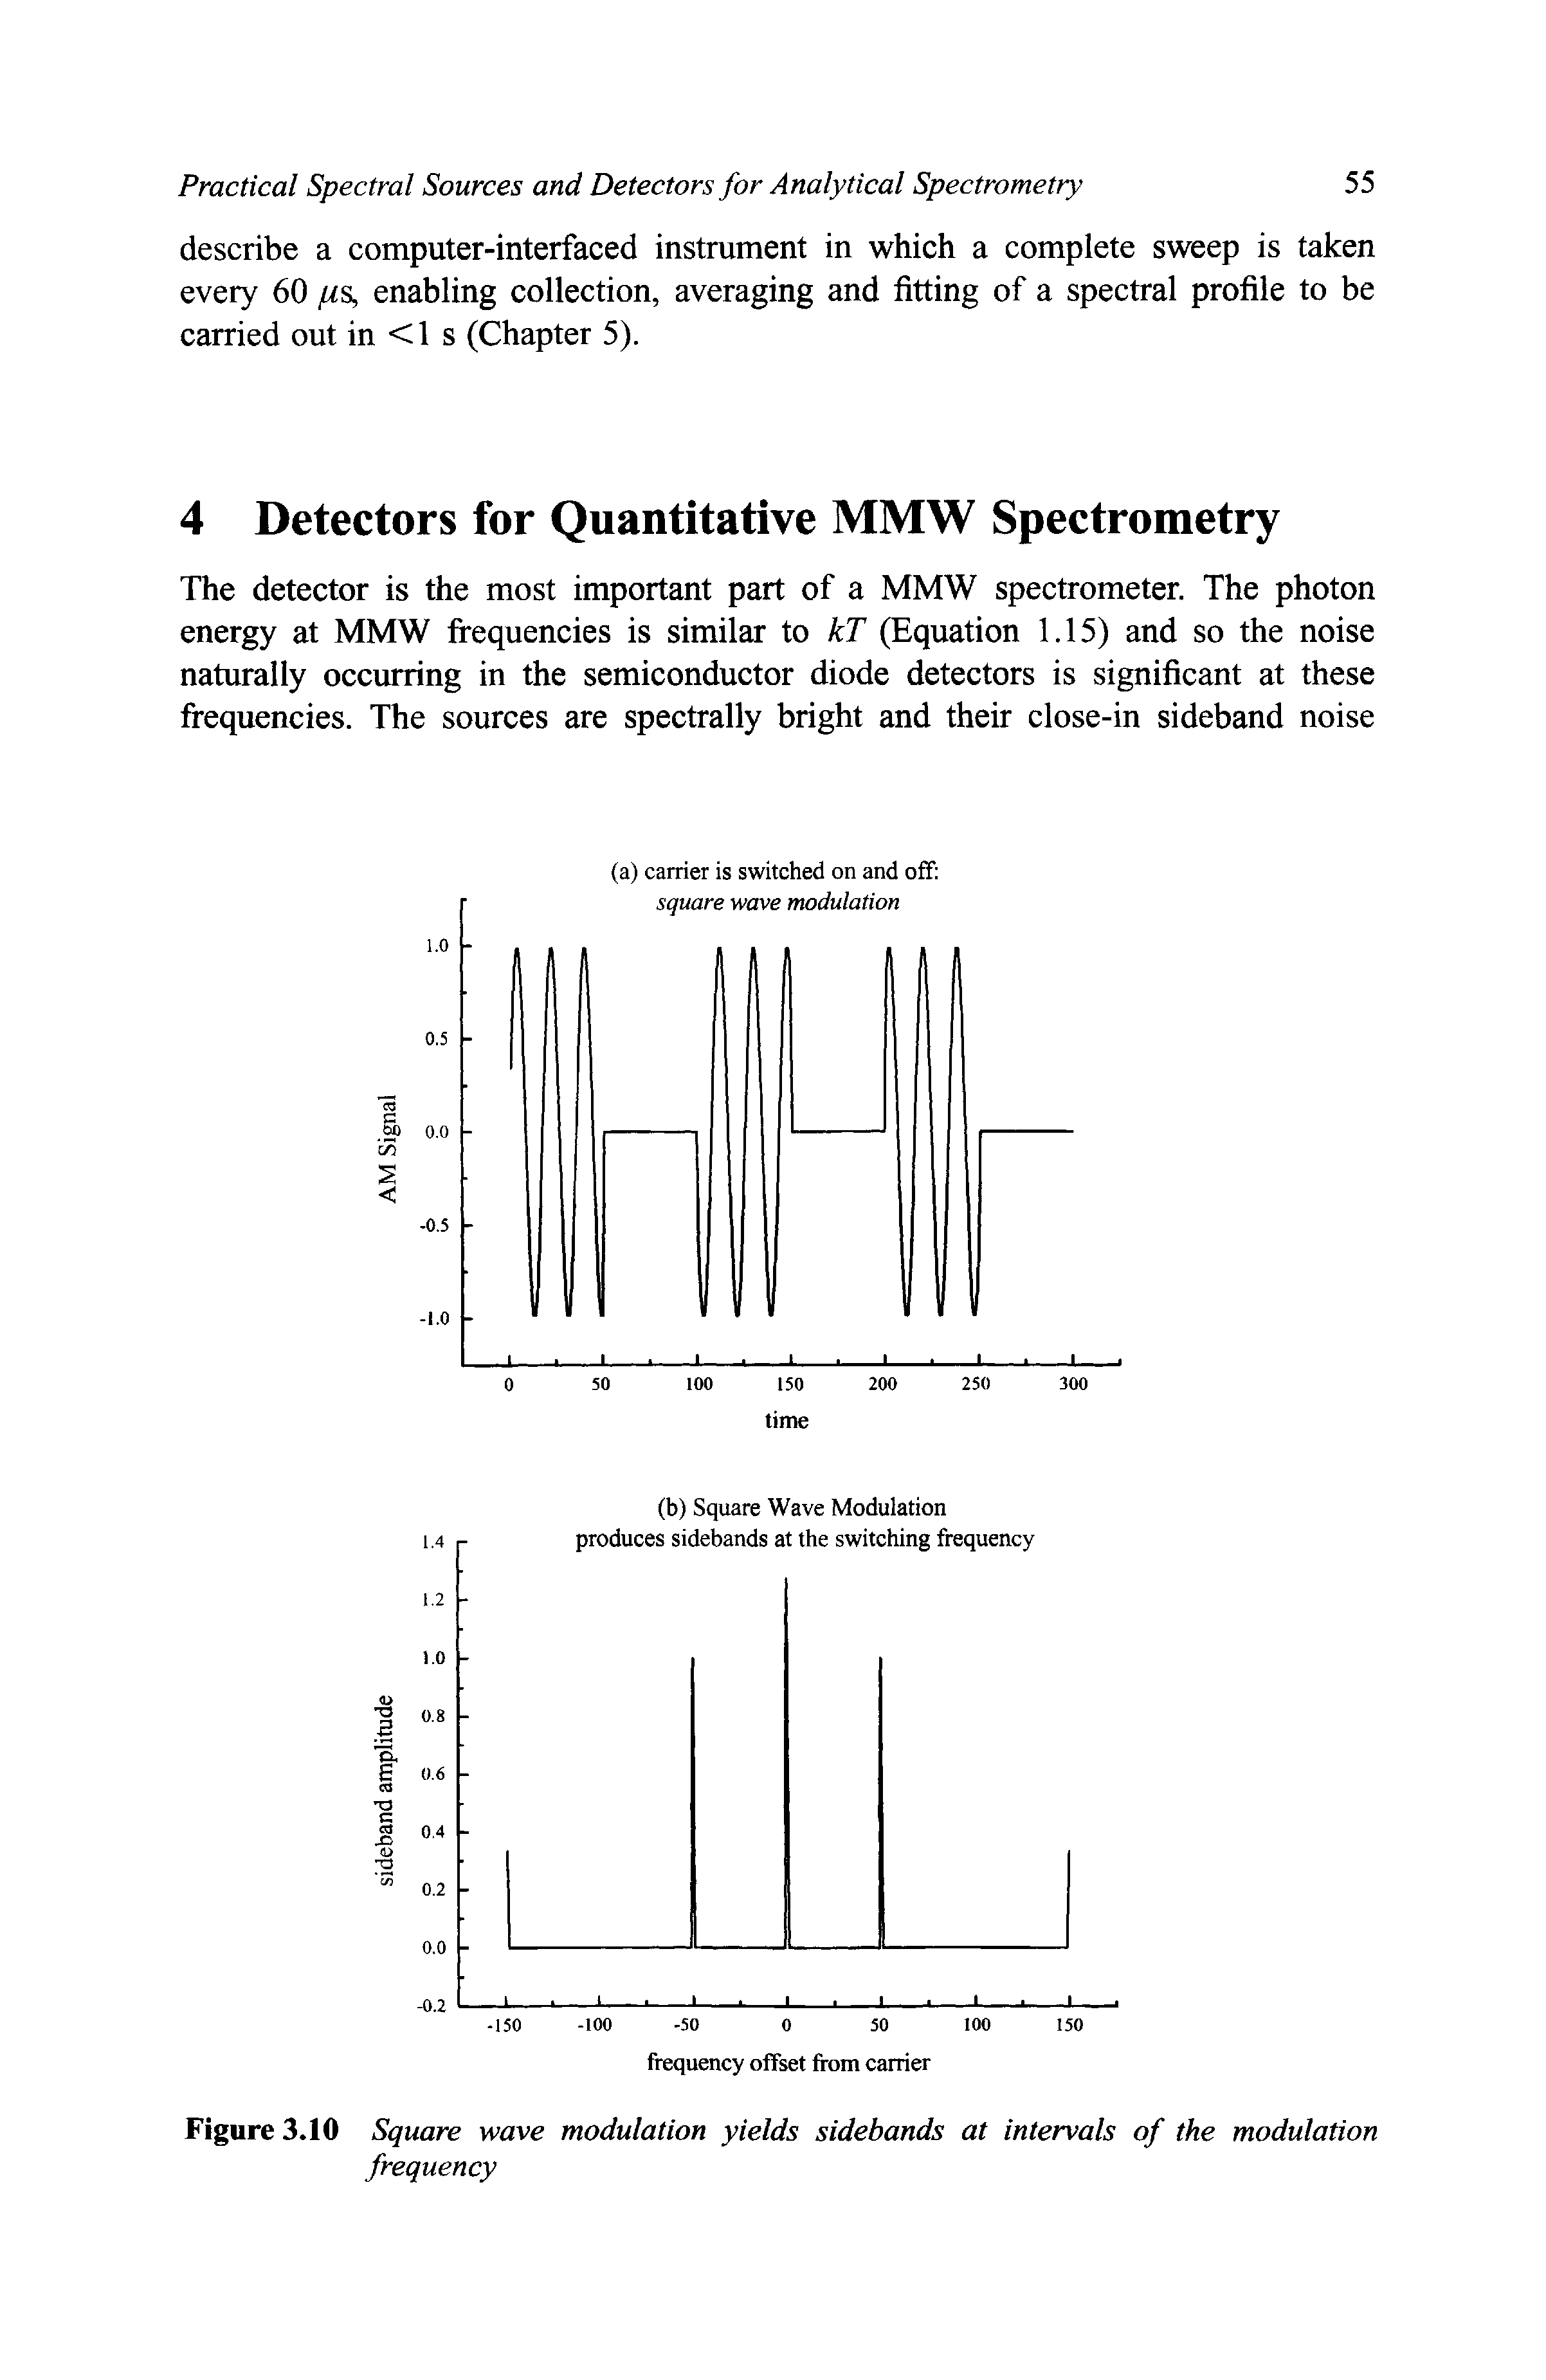 Figure 3.10 Square wave modulation yields sidebands at intervals of the modulation frequency...